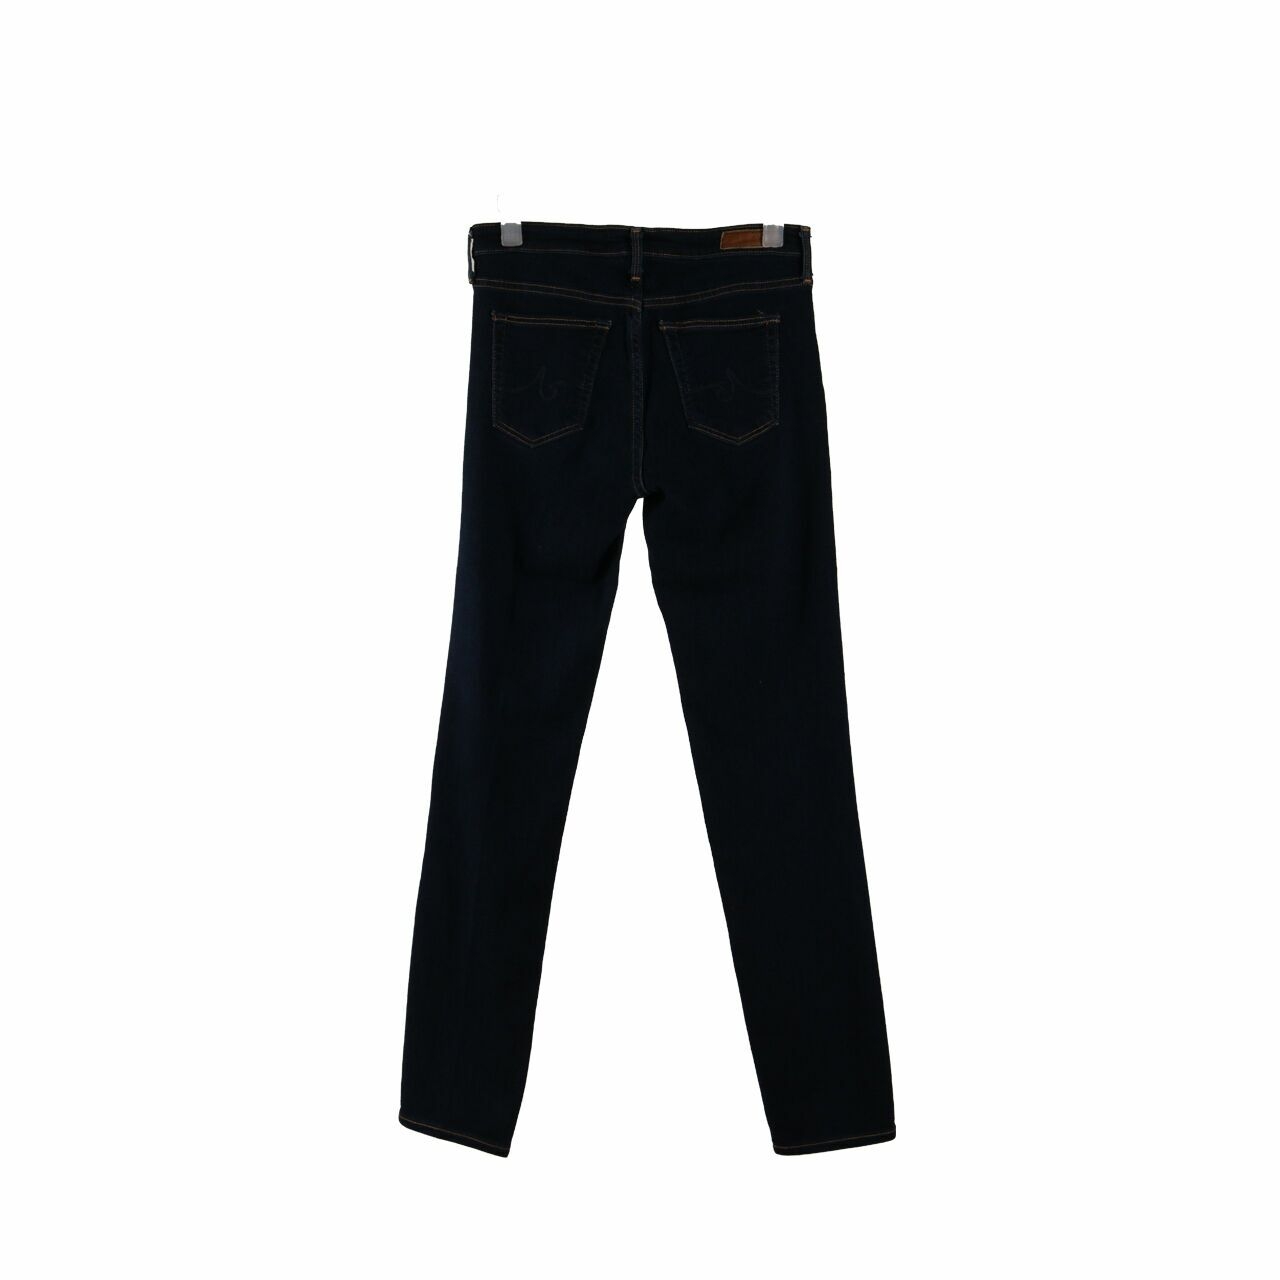 Adriano Goldschmied Navy Jeans Long Pants